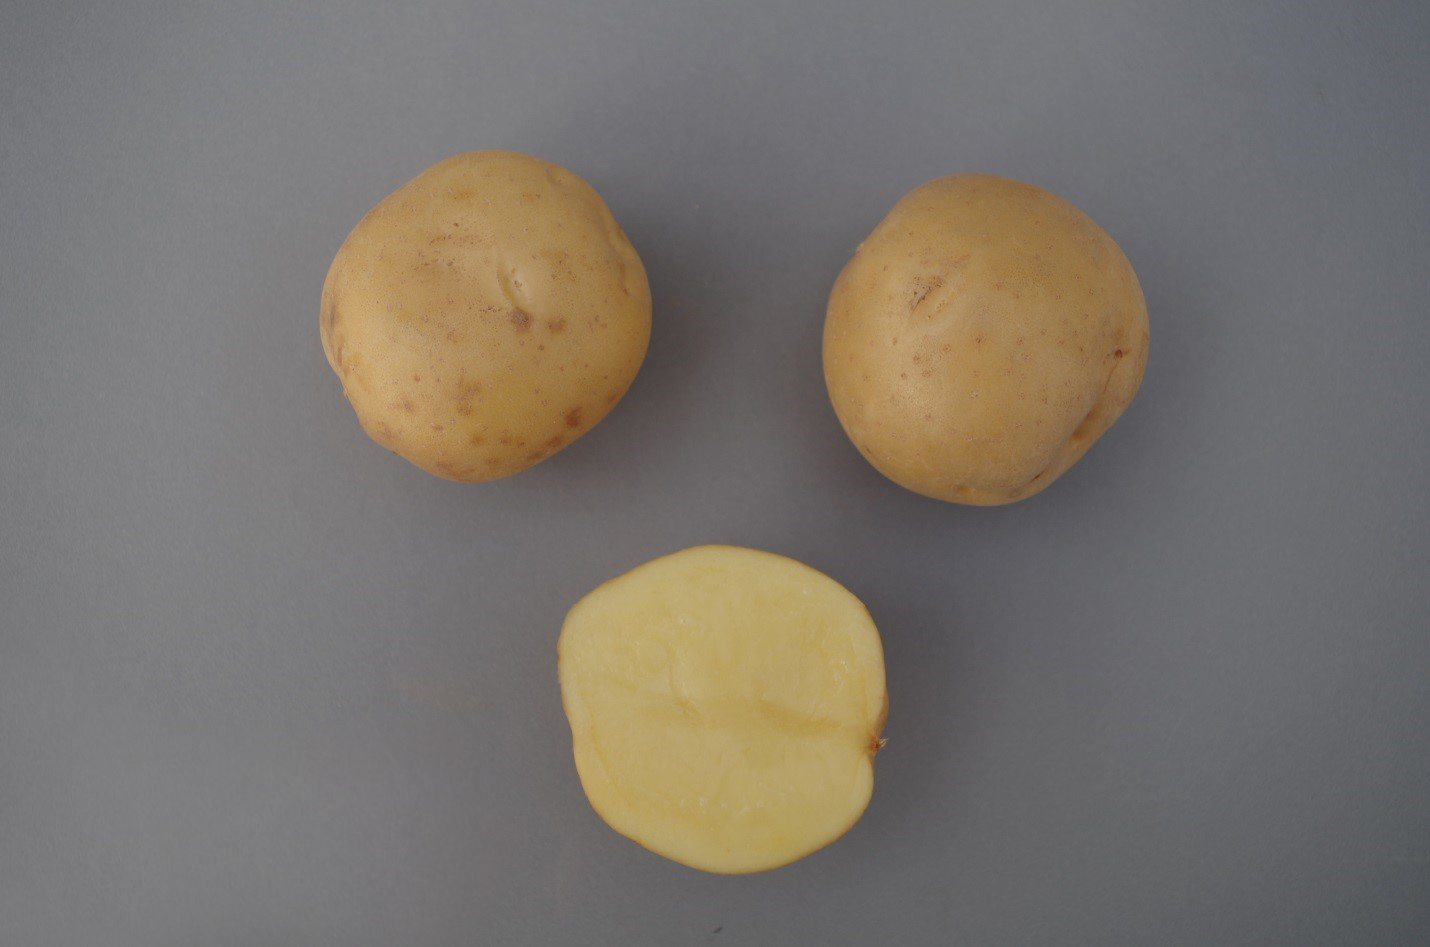 Two whole potatoes and one potato cut in half.